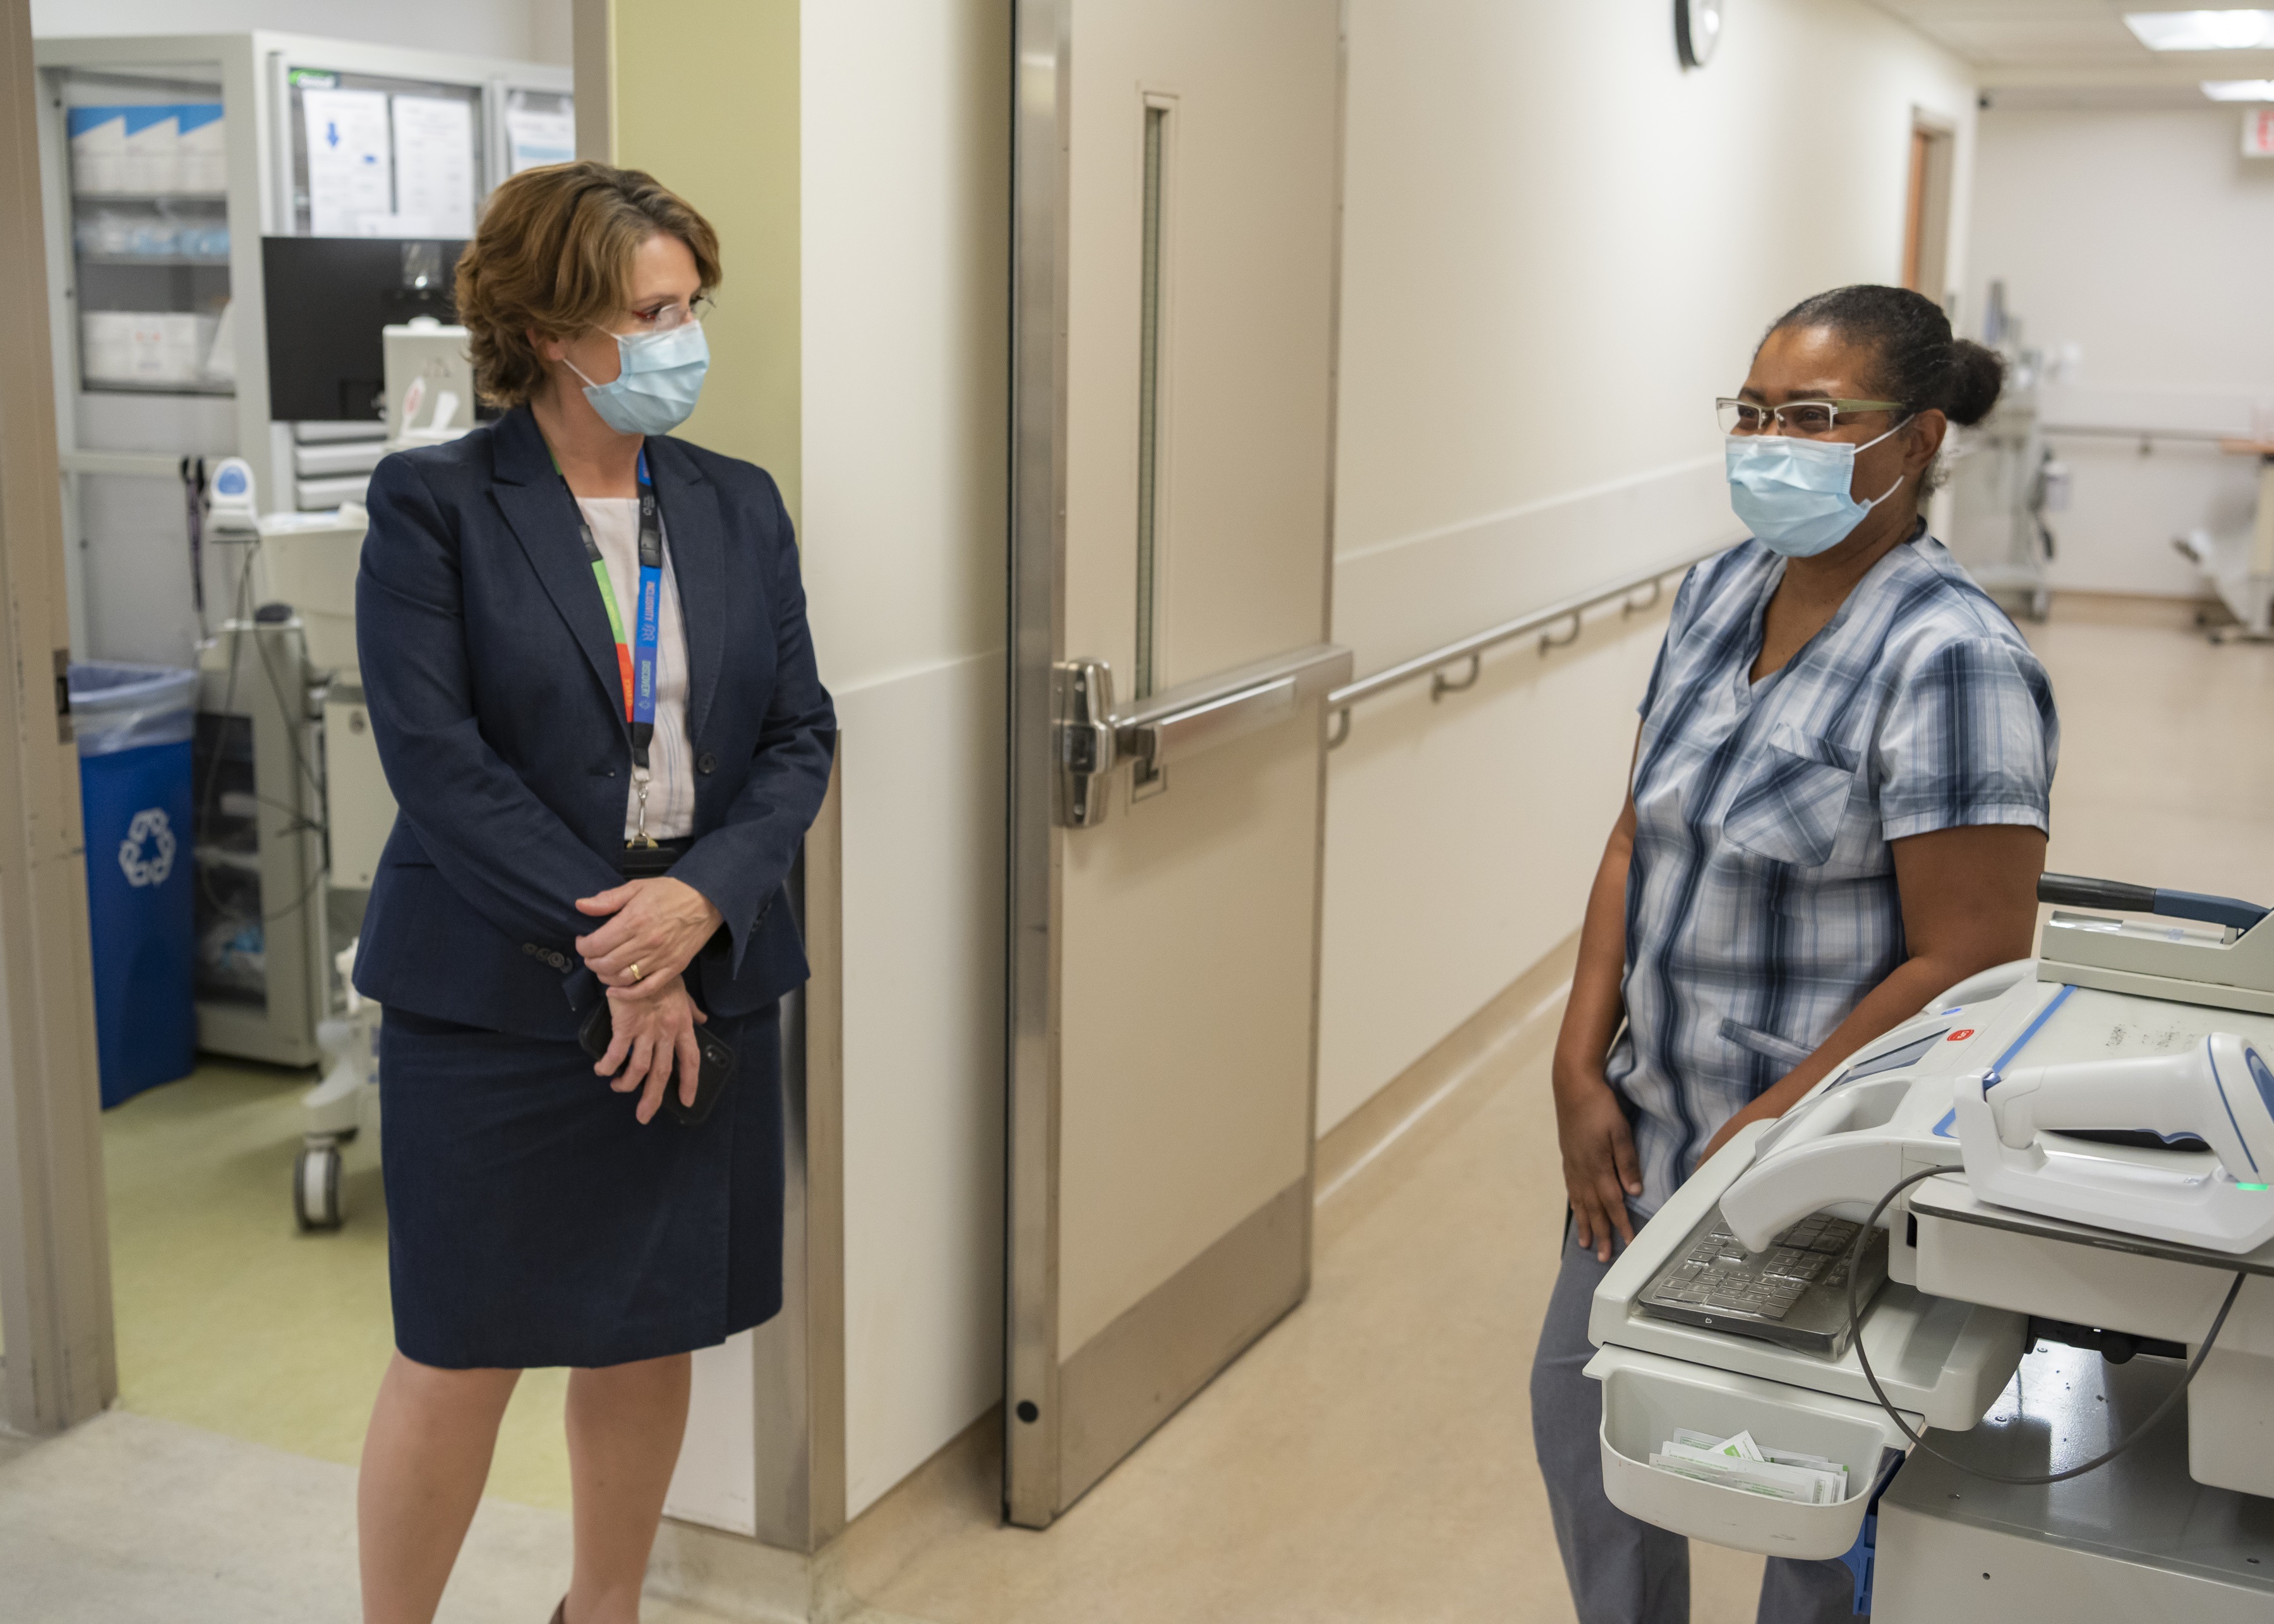 Kate Wilkinson, a vice president at Sinai Health speaks with a health care worker on a unit at Hennick Bridgepoint hospital